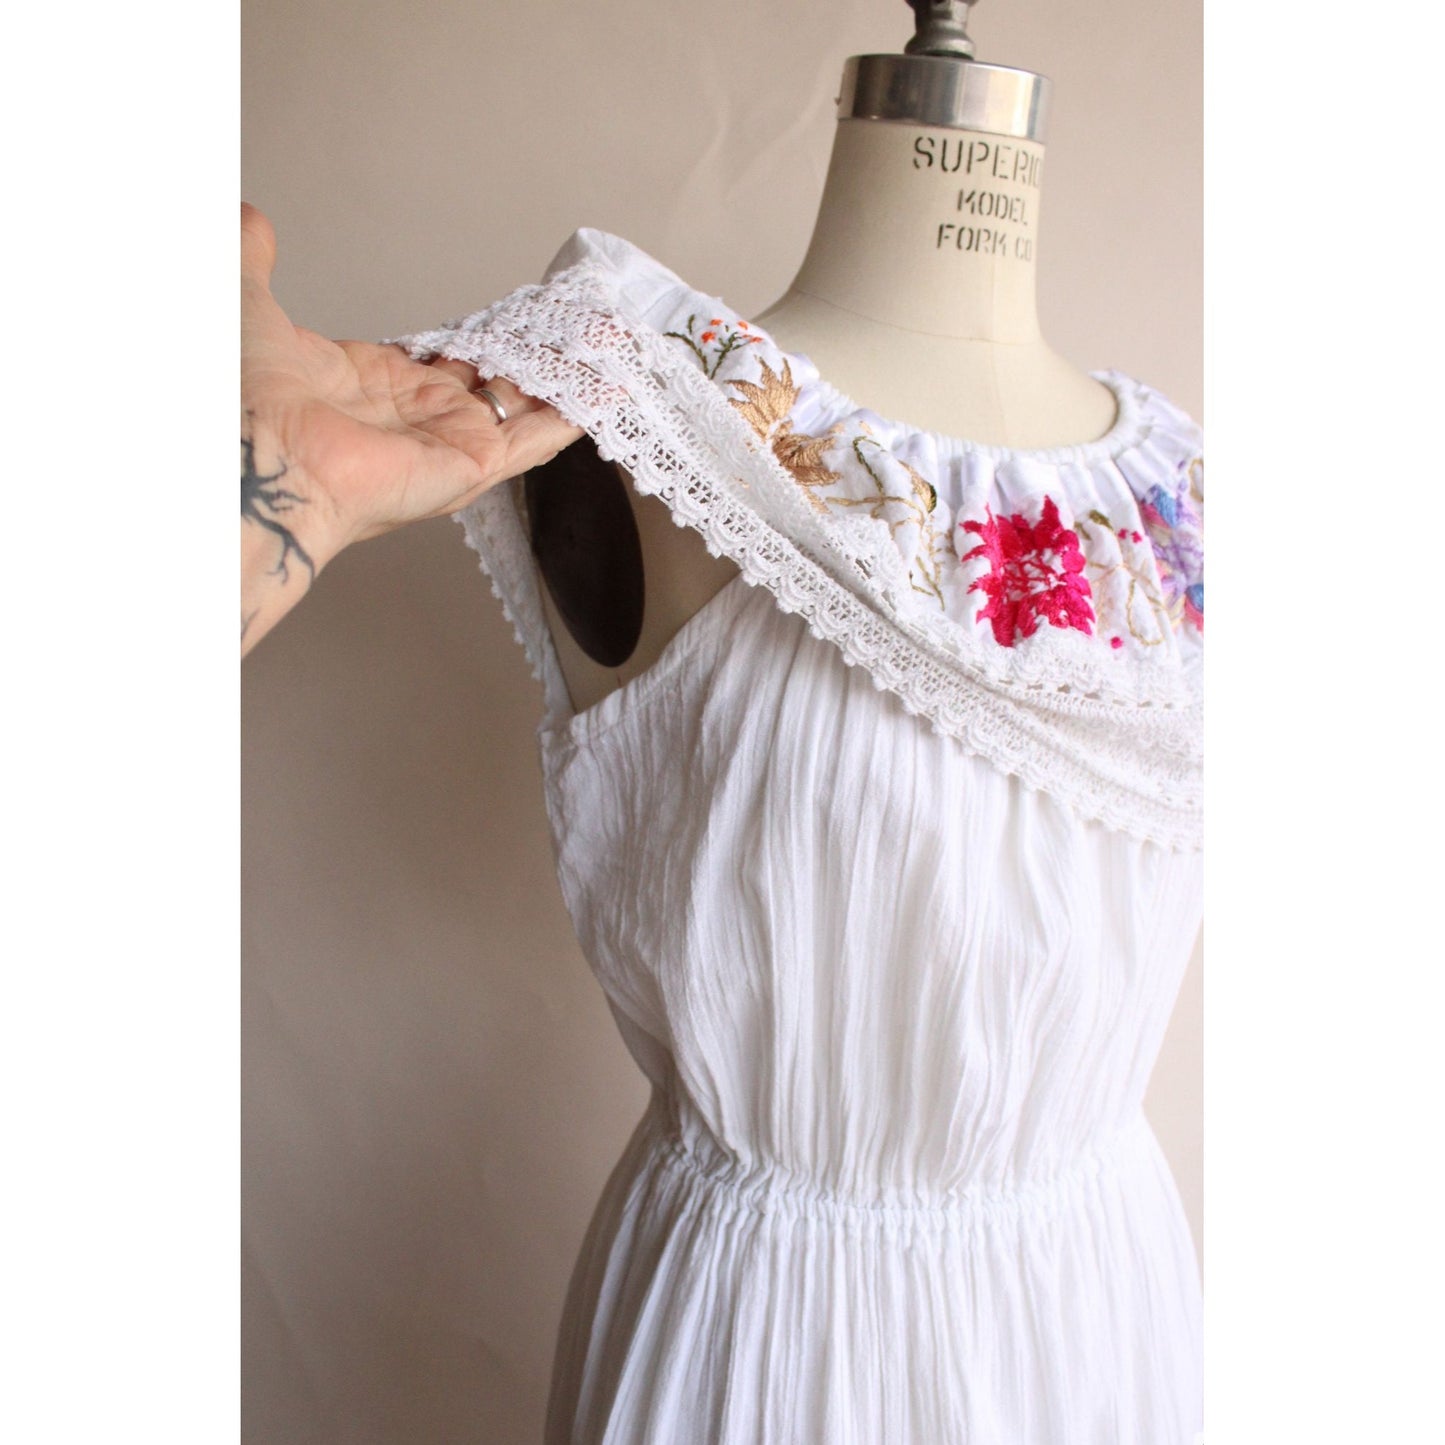 Vintage 1970s 1980s Dress,  White Cotton Embroidered Peasant Dress, Large Size